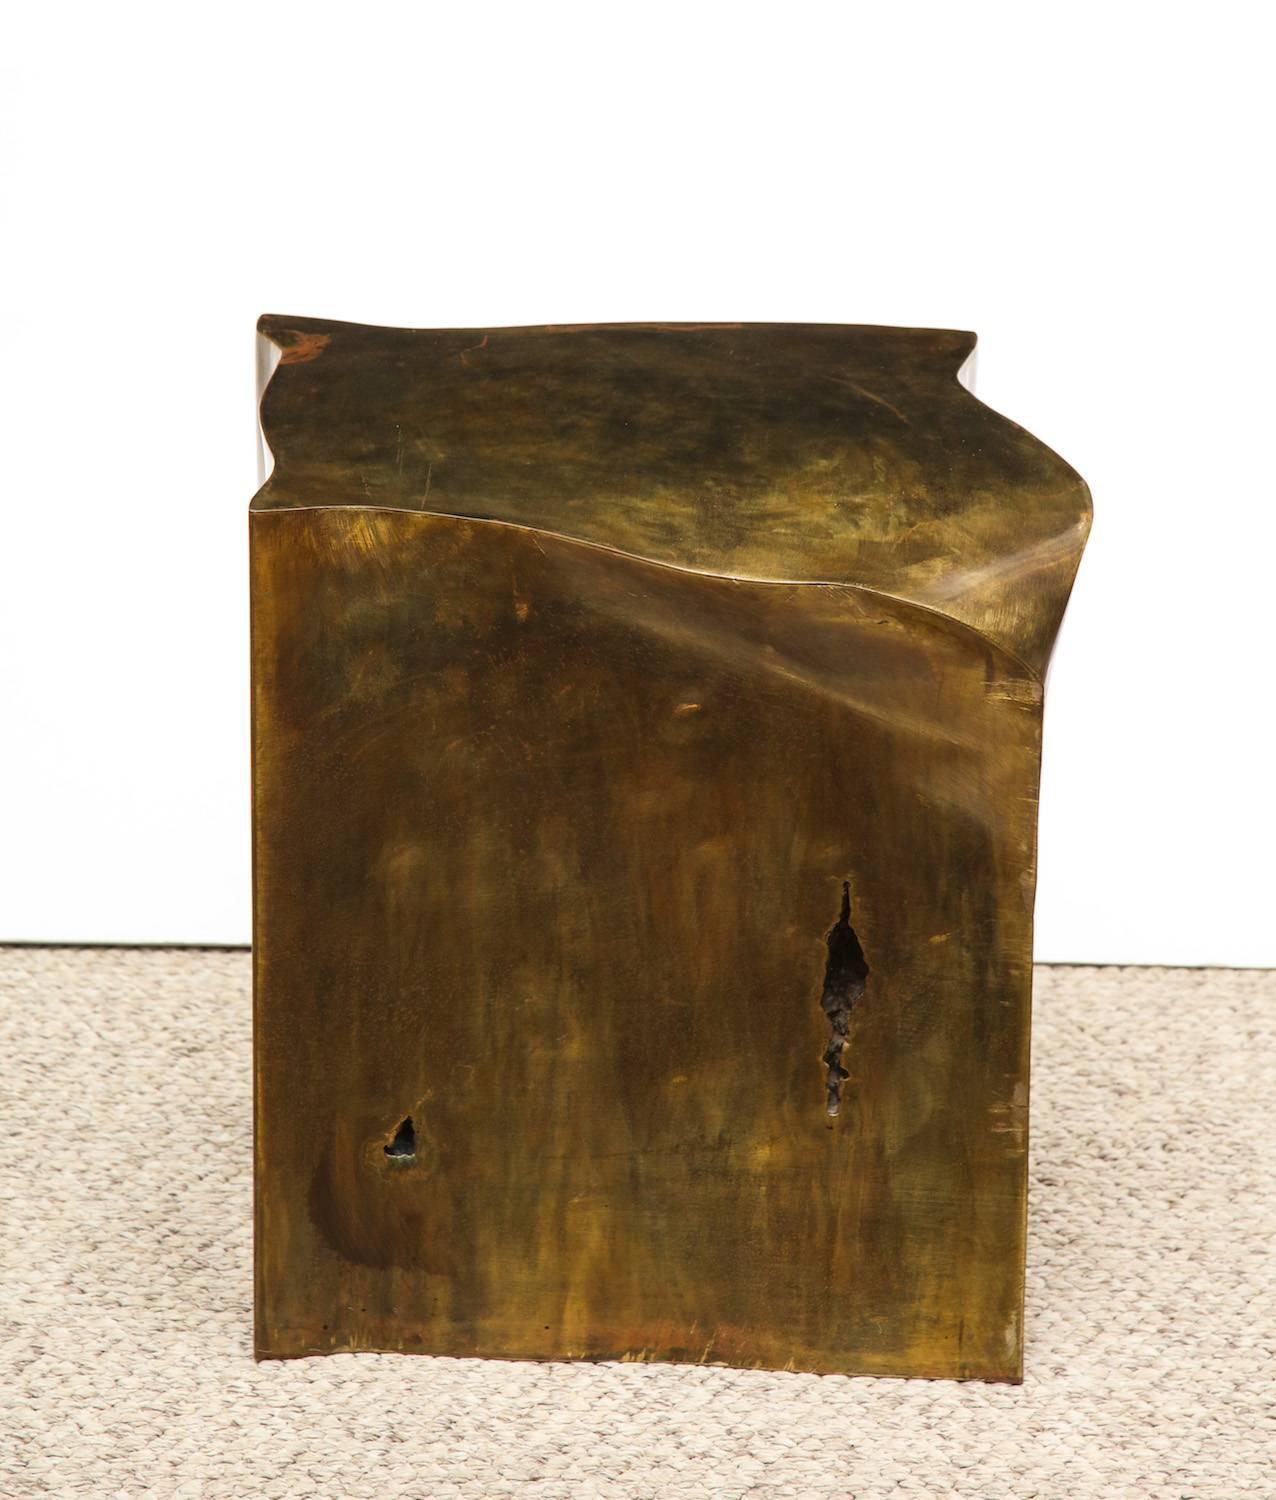 Studio built cube by Philip & Kelvin LaVerne. Sculptural cube that can be used at a side table. Welded form with irregular surfaces and crevices. Torched and oxidized finish to top. A very rare piece. Signed on top of side edge.